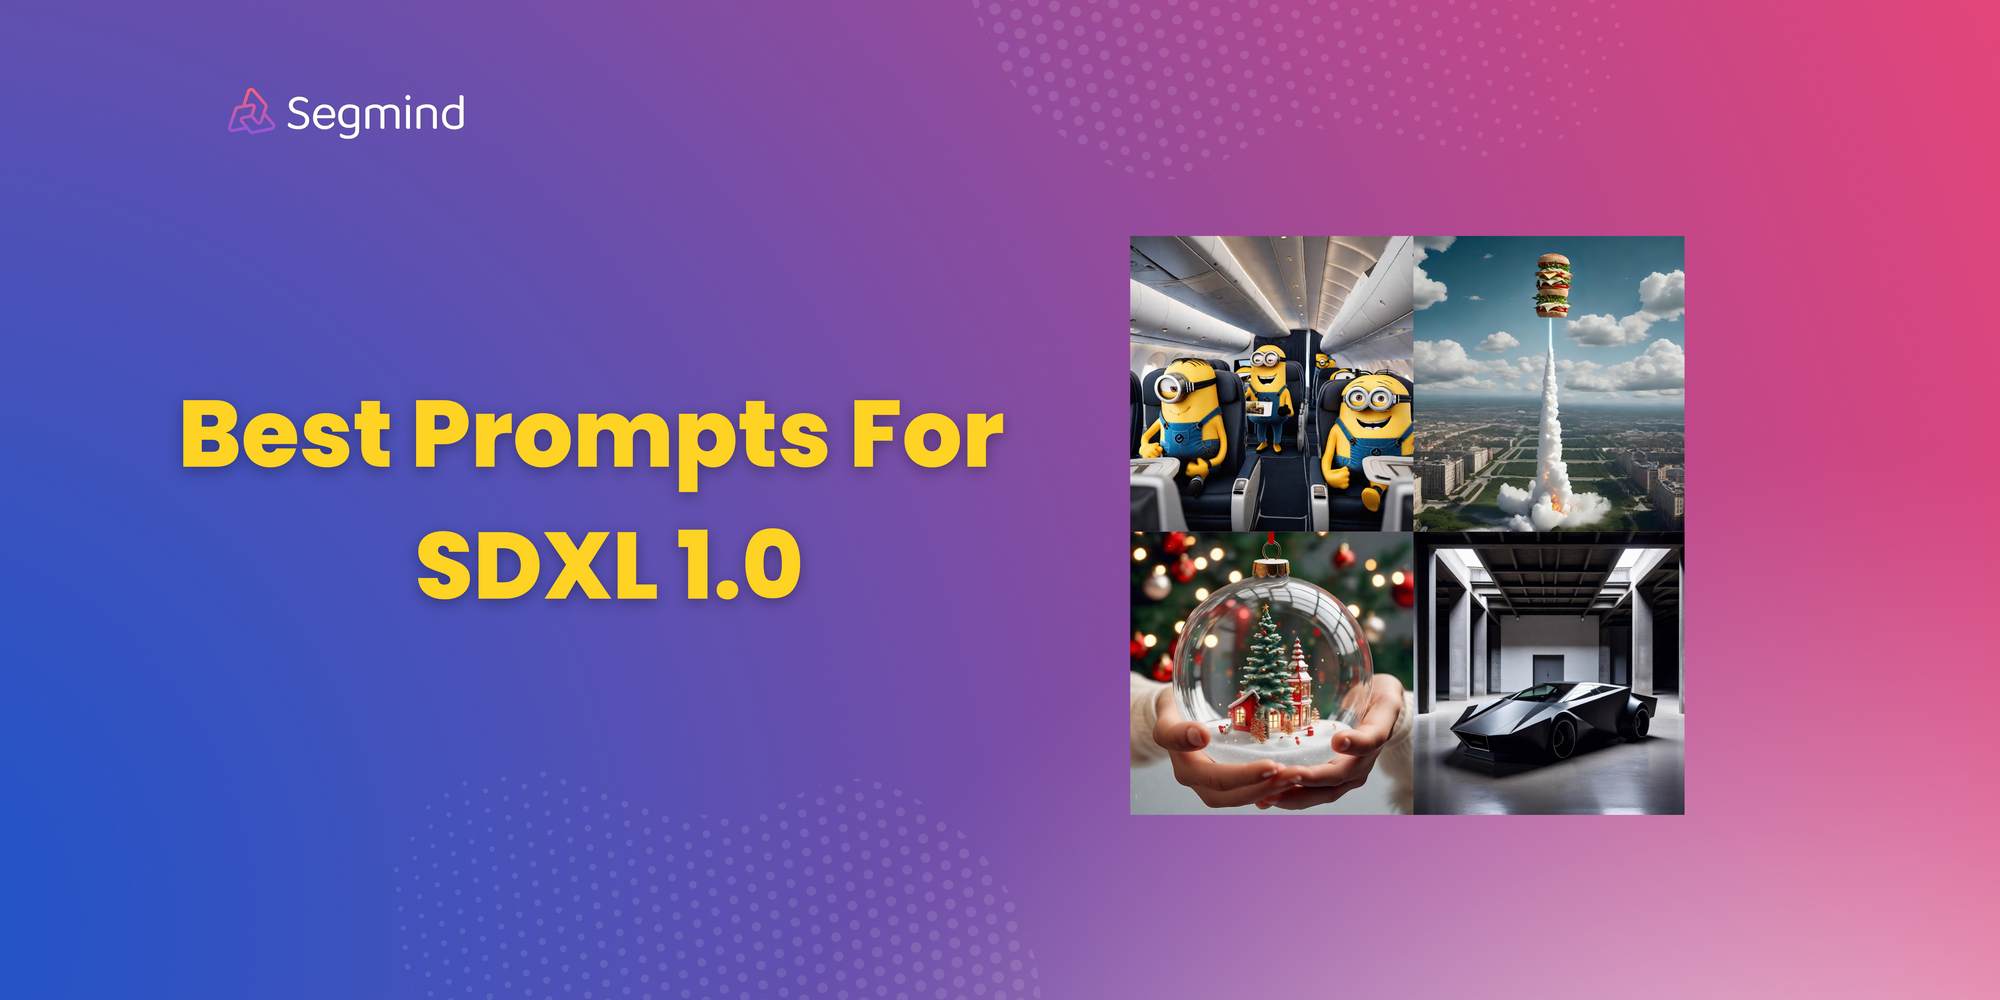 Best Prompts for SDXL 1.0